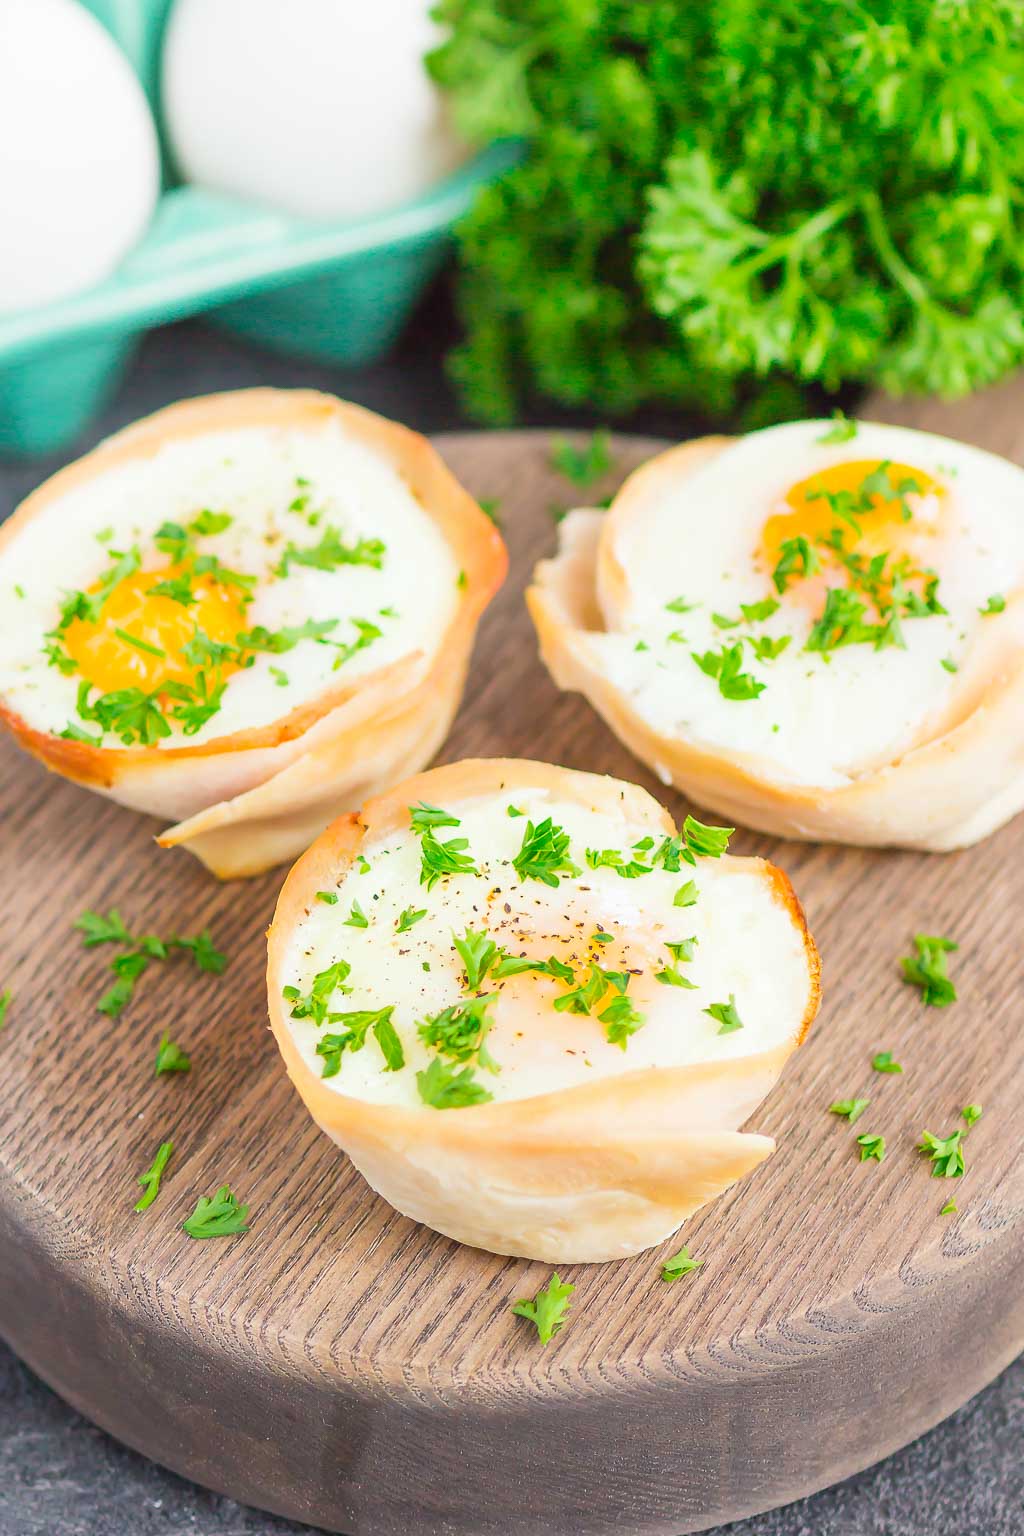 These Turkey Egg Cups are loaded with flavor and perfect for a quick and hearty breakfast. Made with just a few ingredients and ready in less than 30 minutes, this easy dish is a great way to start the day! #eggs #eggcups #eggmuffins #turkeycups #turkeyeggcups